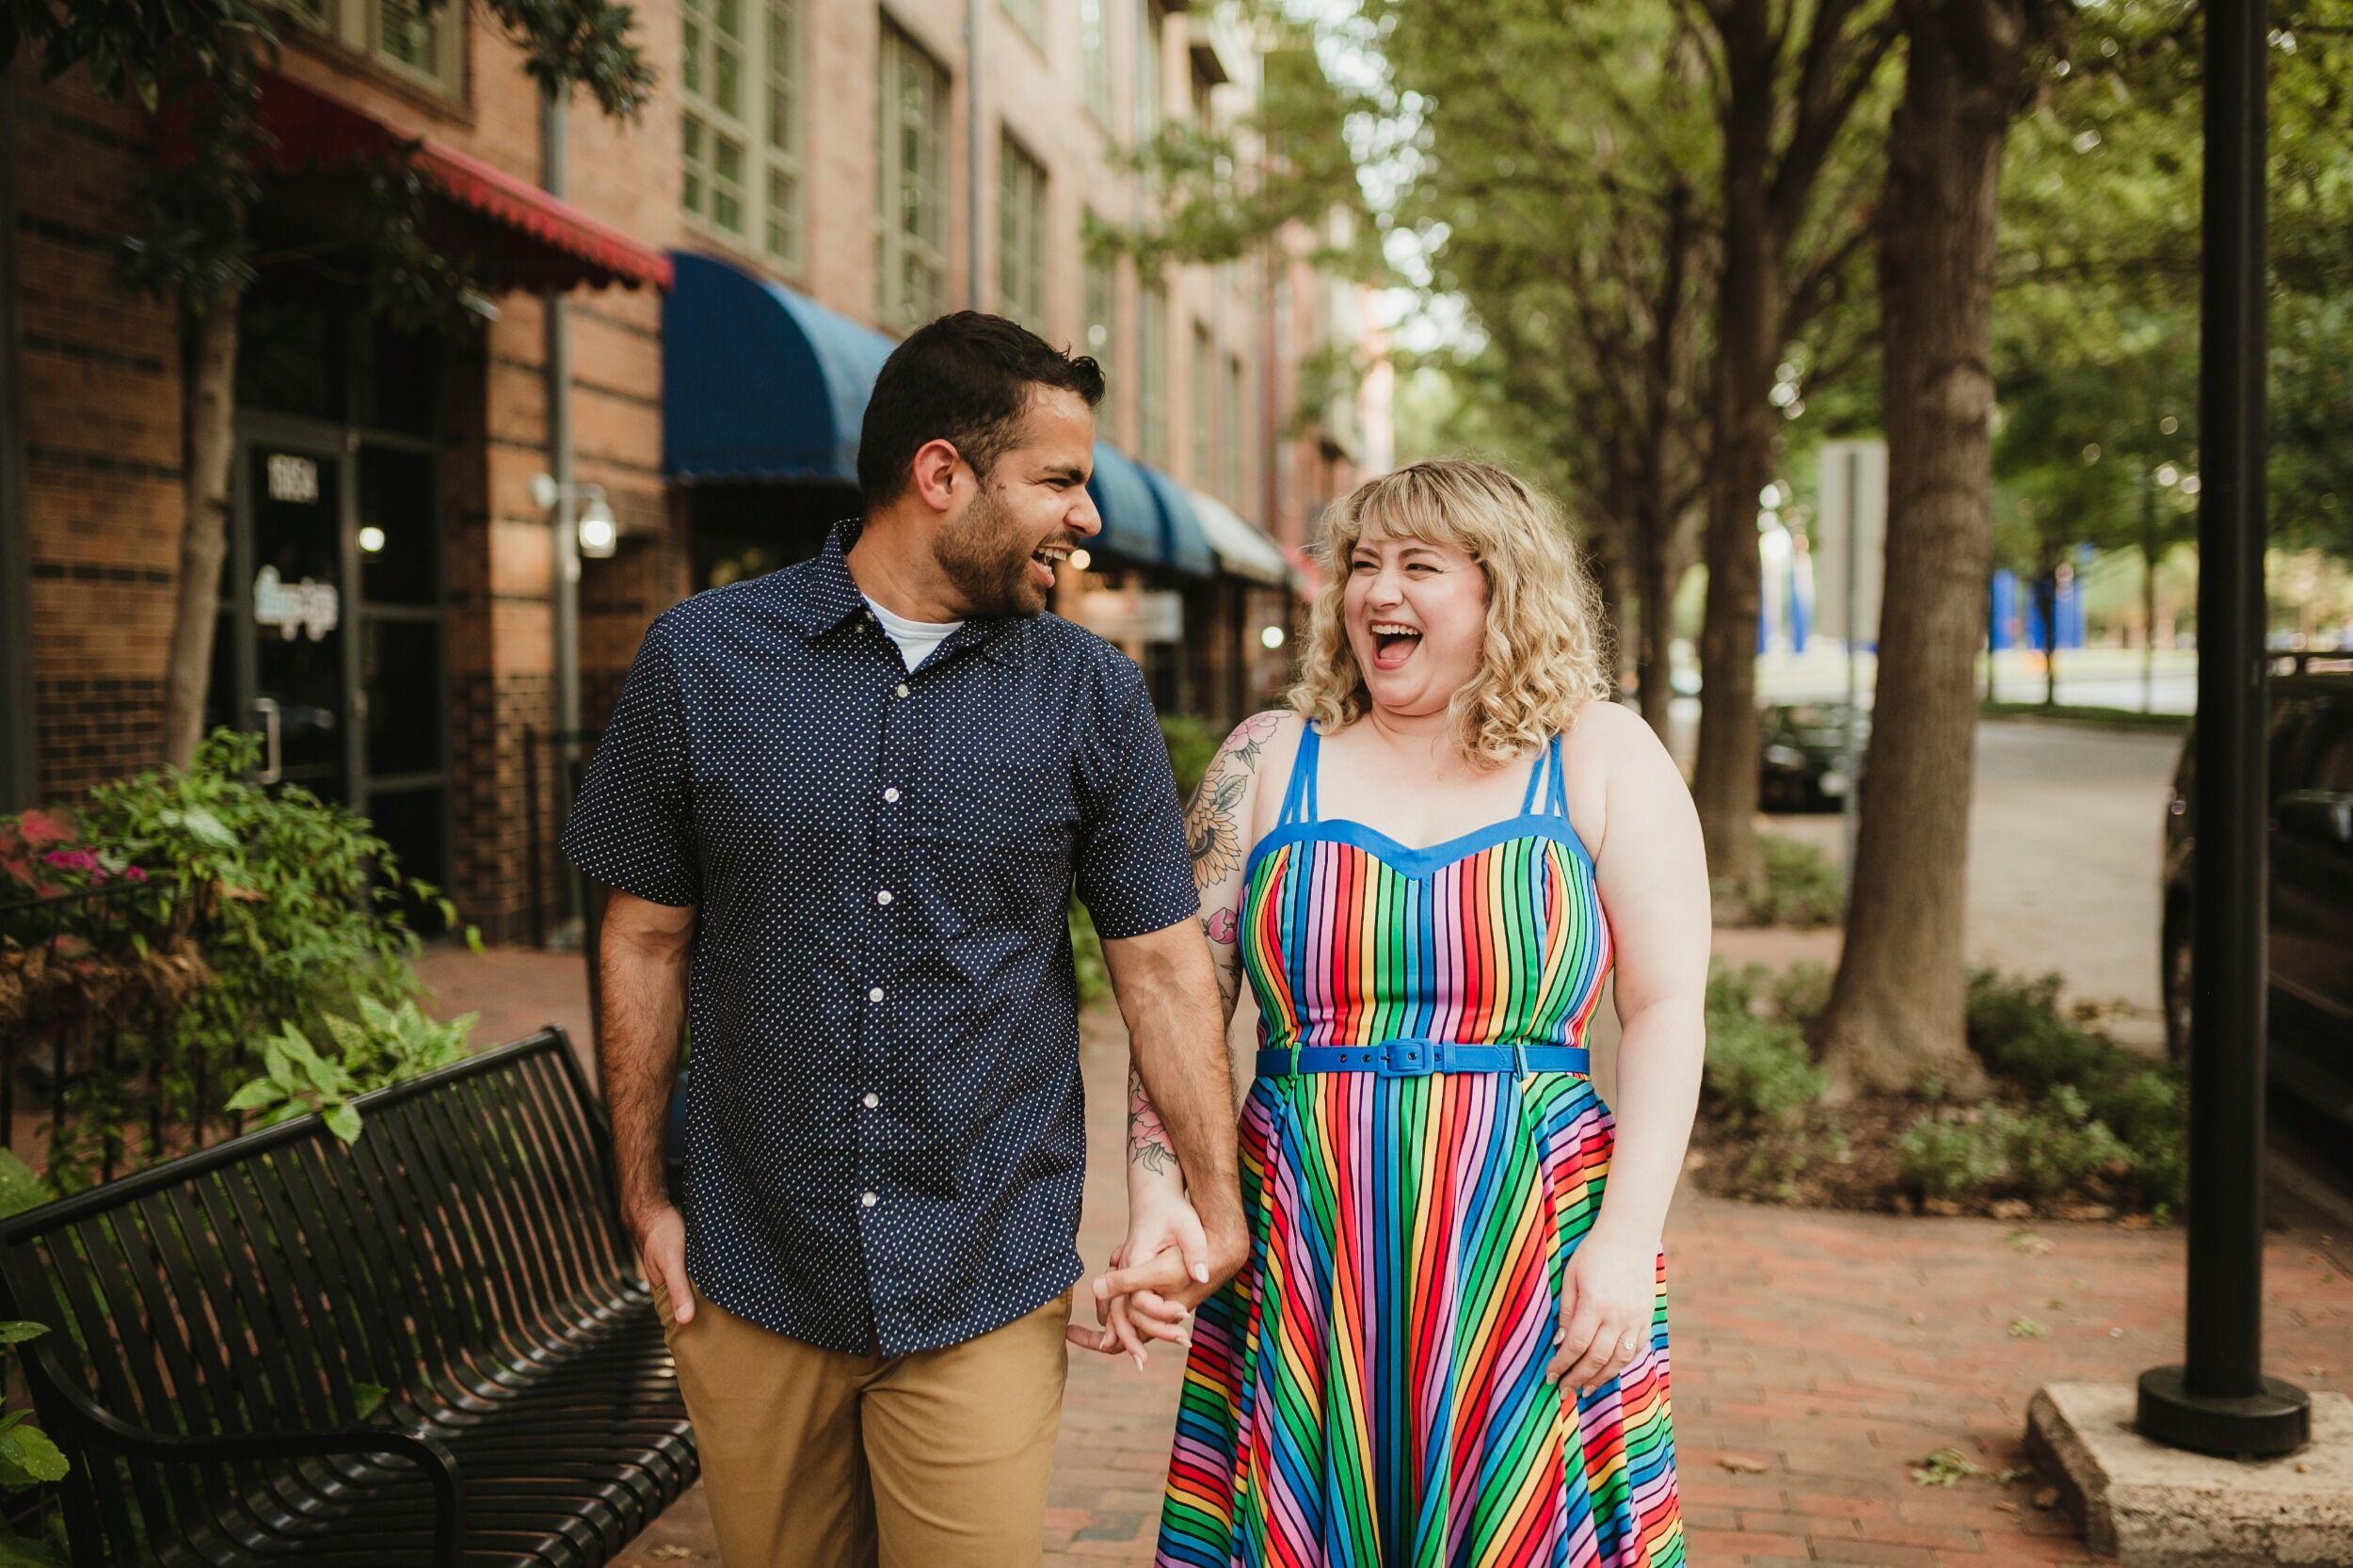 Meagan Downloaded Bumble to Enter a Contest. Instead, She Found Anoop.